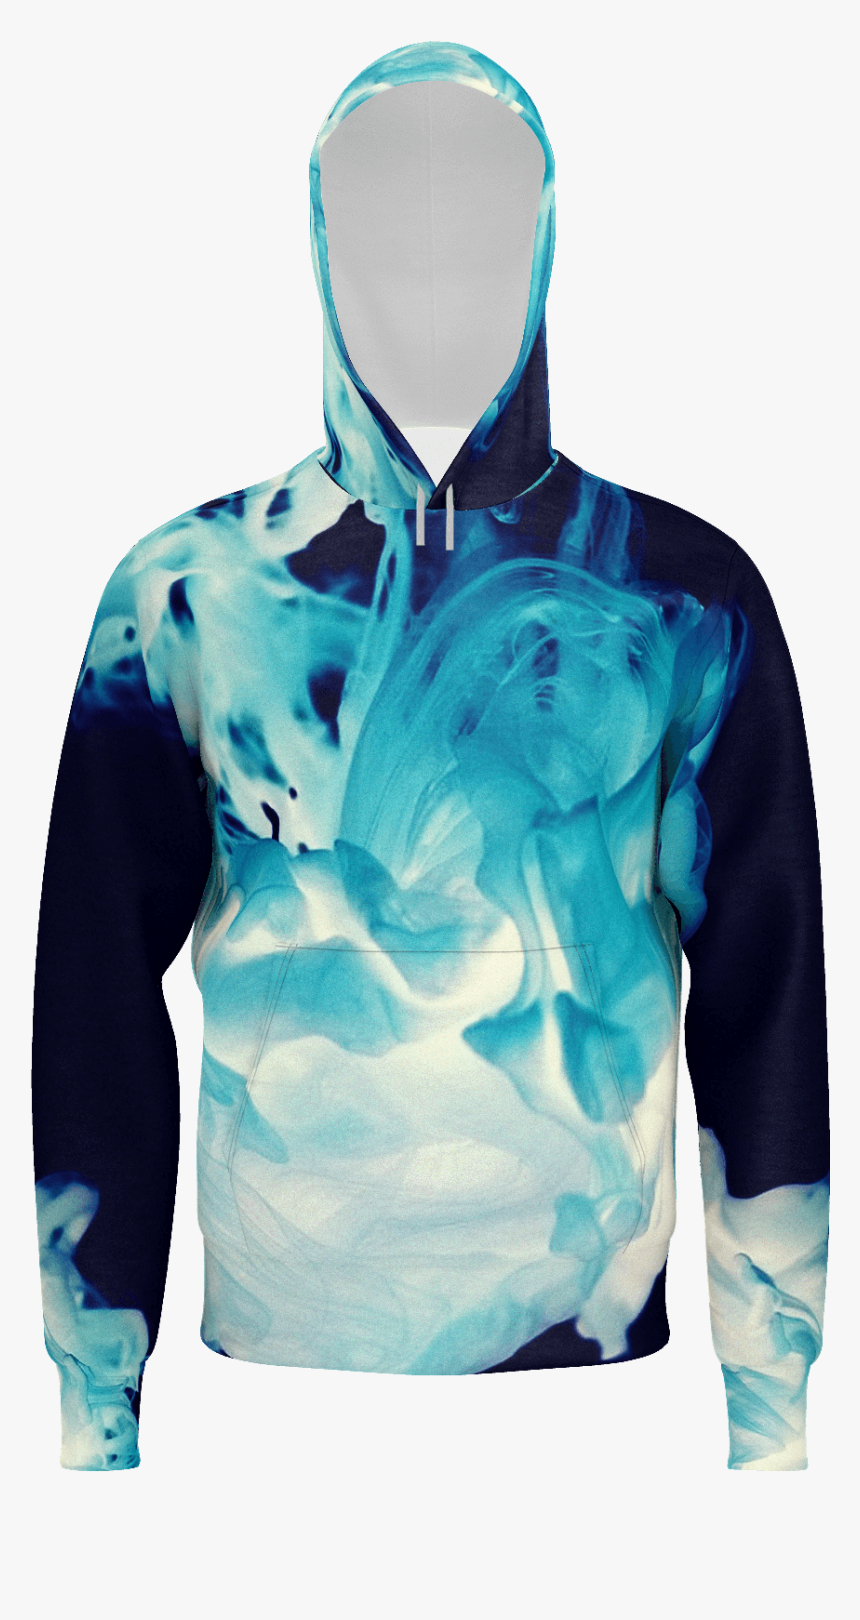 Load Image Into Gallery Viewer, Blue Explosion - Hoodie, HD Png Download, Free Download